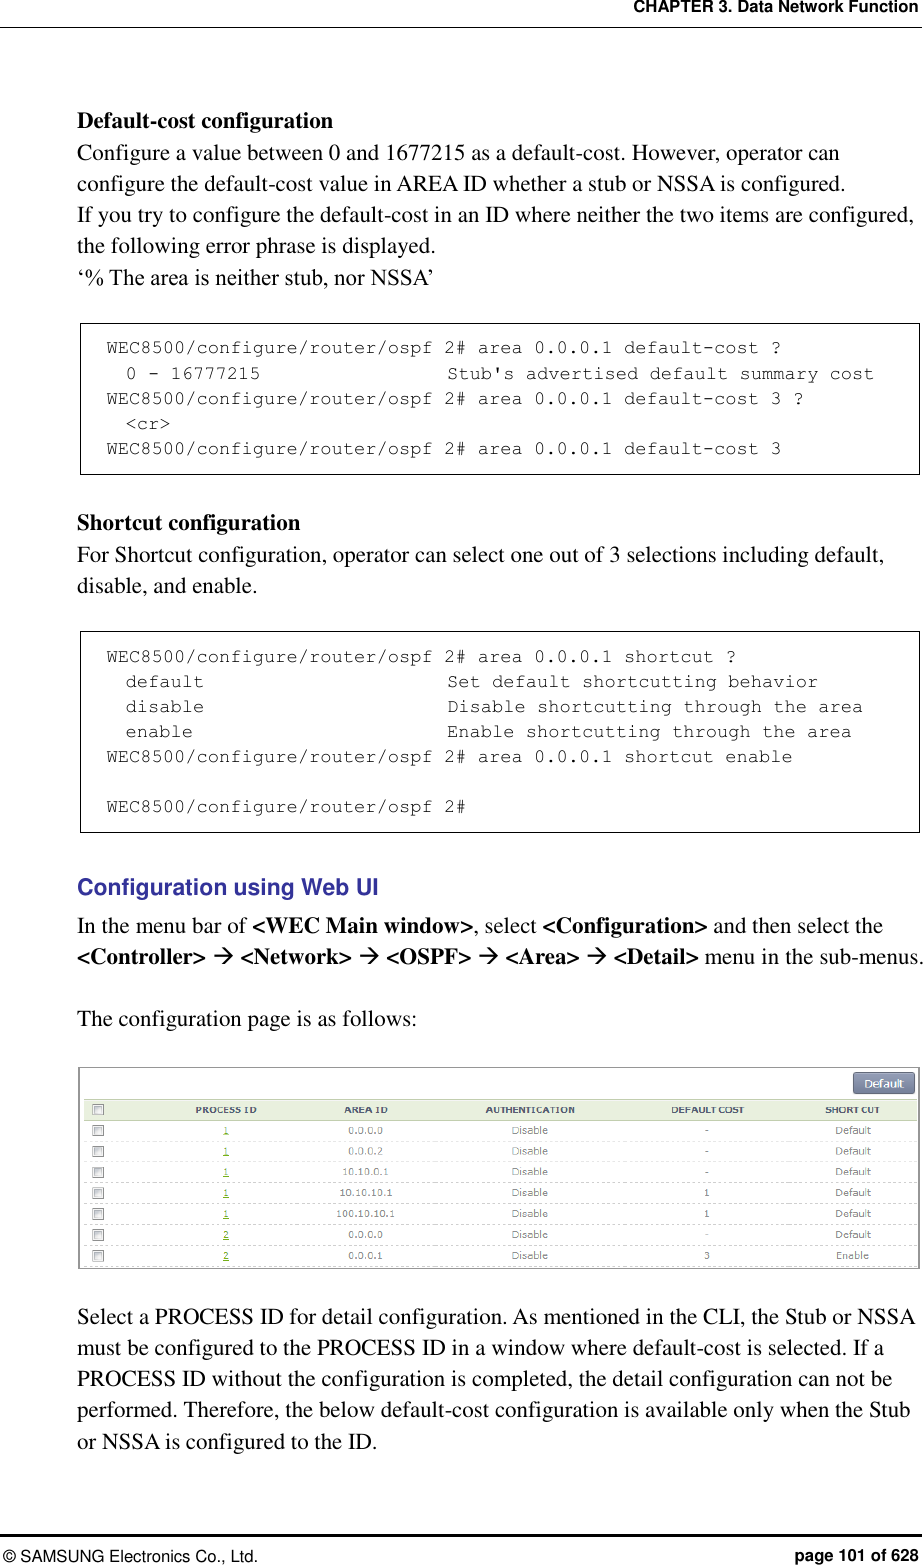 CHAPTER 3. Data Network Function ©  SAMSUNG Electronics Co., Ltd.  page 101 of 628 Default-cost configuration Configure a value between 0 and 1677215 as a default-cost. However, operator can configure the default-cost value in AREA ID whether a stub or NSSA is configured.   If you try to configure the default-cost in an ID where neither the two items are configured, the following error phrase is displayed.   ‘% The area is neither stub, nor NSSA’  WEC8500/configure/router/ospf 2# area 0.0.0.1 default-cost ?   0 - 16777215                    Stub&apos;s advertised default summary cost WEC8500/configure/router/ospf 2# area 0.0.0.1 default-cost 3 ?   &lt;cr&gt; WEC8500/configure/router/ospf 2# area 0.0.0.1 default-cost 3  Shortcut configuration   For Shortcut configuration, operator can select one out of 3 selections including default, disable, and enable.    WEC8500/configure/router/ospf 2# area 0.0.0.1 shortcut ?        default                          Set default shortcutting behavior   disable                          Disable shortcutting through the area   enable                           Enable shortcutting through the area WEC8500/configure/router/ospf 2# area 0.0.0.1 shortcut enable   WEC8500/configure/router/ospf 2#  Configuration using Web UI In the menu bar of &lt;WEC Main window&gt;, select &lt;Configuration&gt; and then select the &lt;Controller&gt;  &lt;Network&gt;  &lt;OSPF&gt;  &lt;Area&gt;  &lt;Detail&gt; menu in the sub-menus.  The configuration page is as follows:     Select a PROCESS ID for detail configuration. As mentioned in the CLI, the Stub or NSSA must be configured to the PROCESS ID in a window where default-cost is selected. If a PROCESS ID without the configuration is completed, the detail configuration can not be performed. Therefore, the below default-cost configuration is available only when the Stub or NSSA is configured to the ID.   